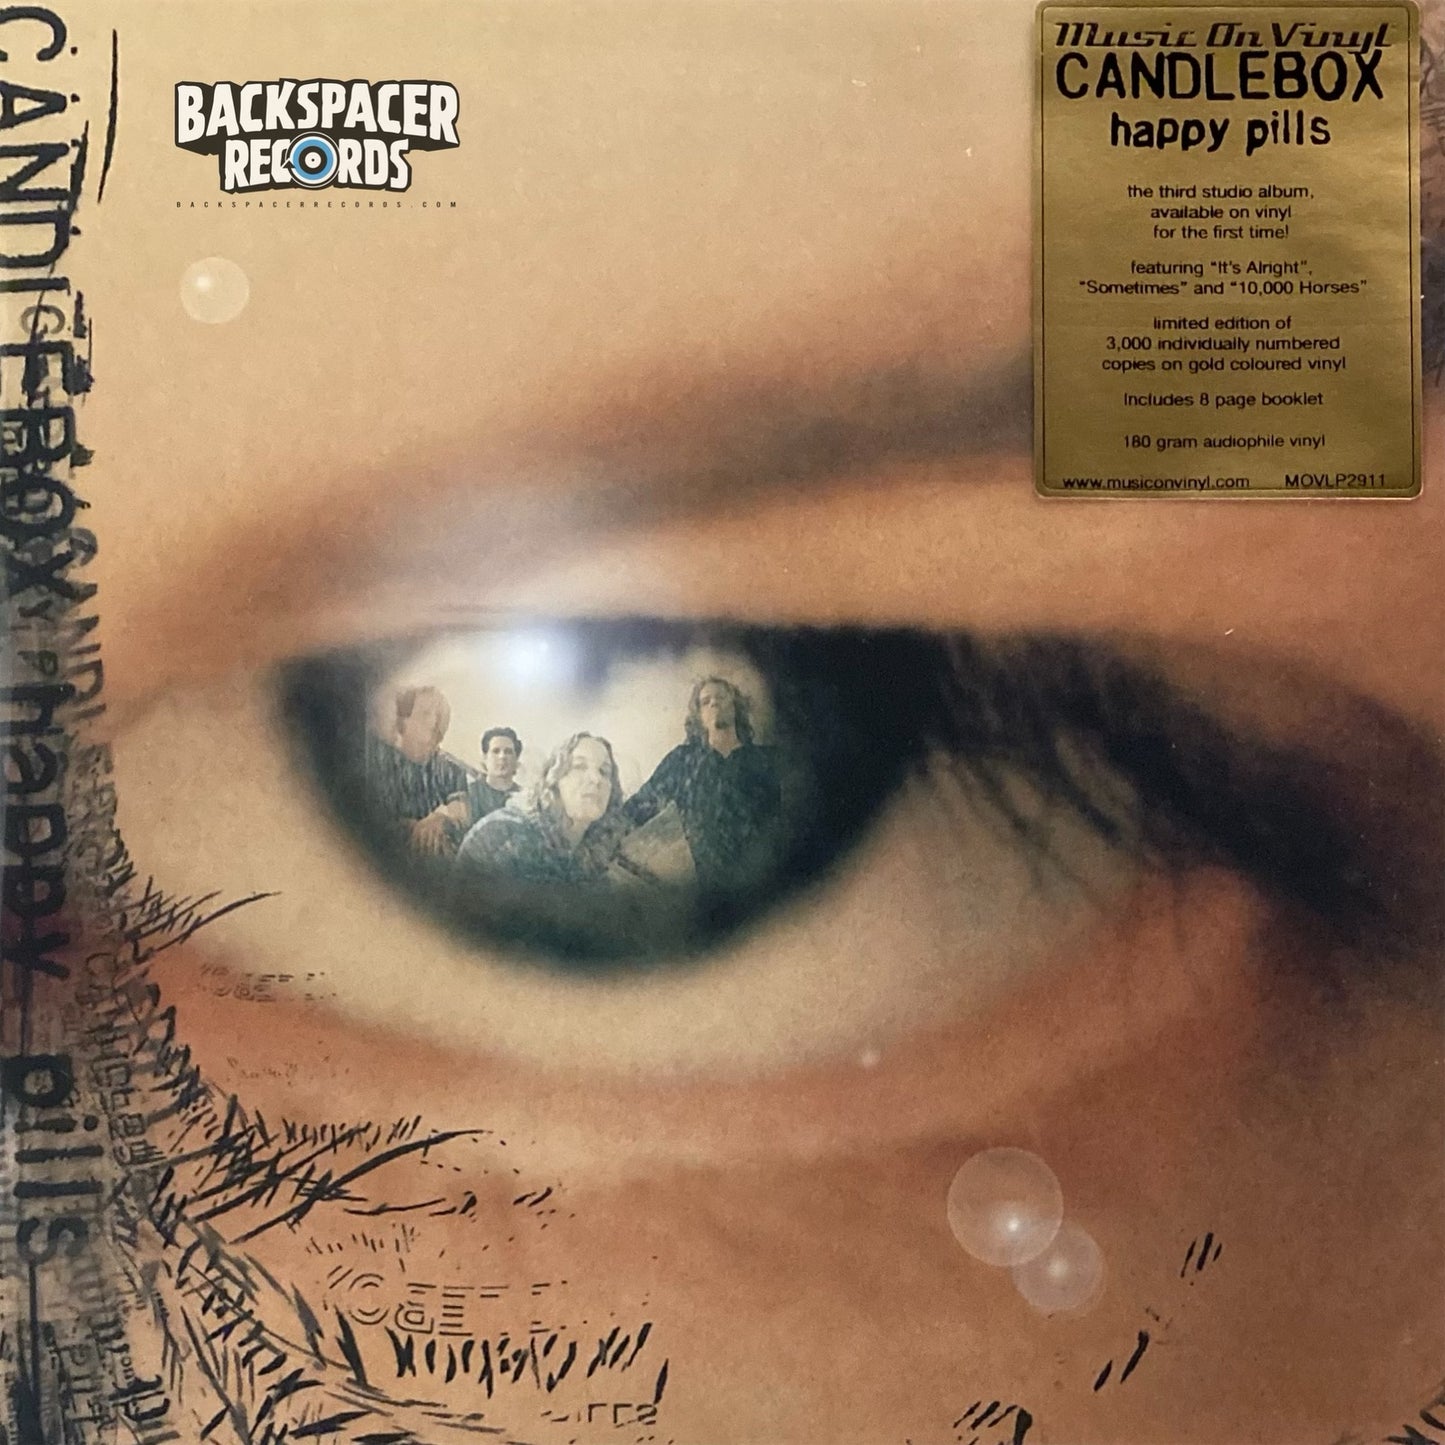 Candlebox - Happy Pills (Limited Edition) 2-LP (MOV)